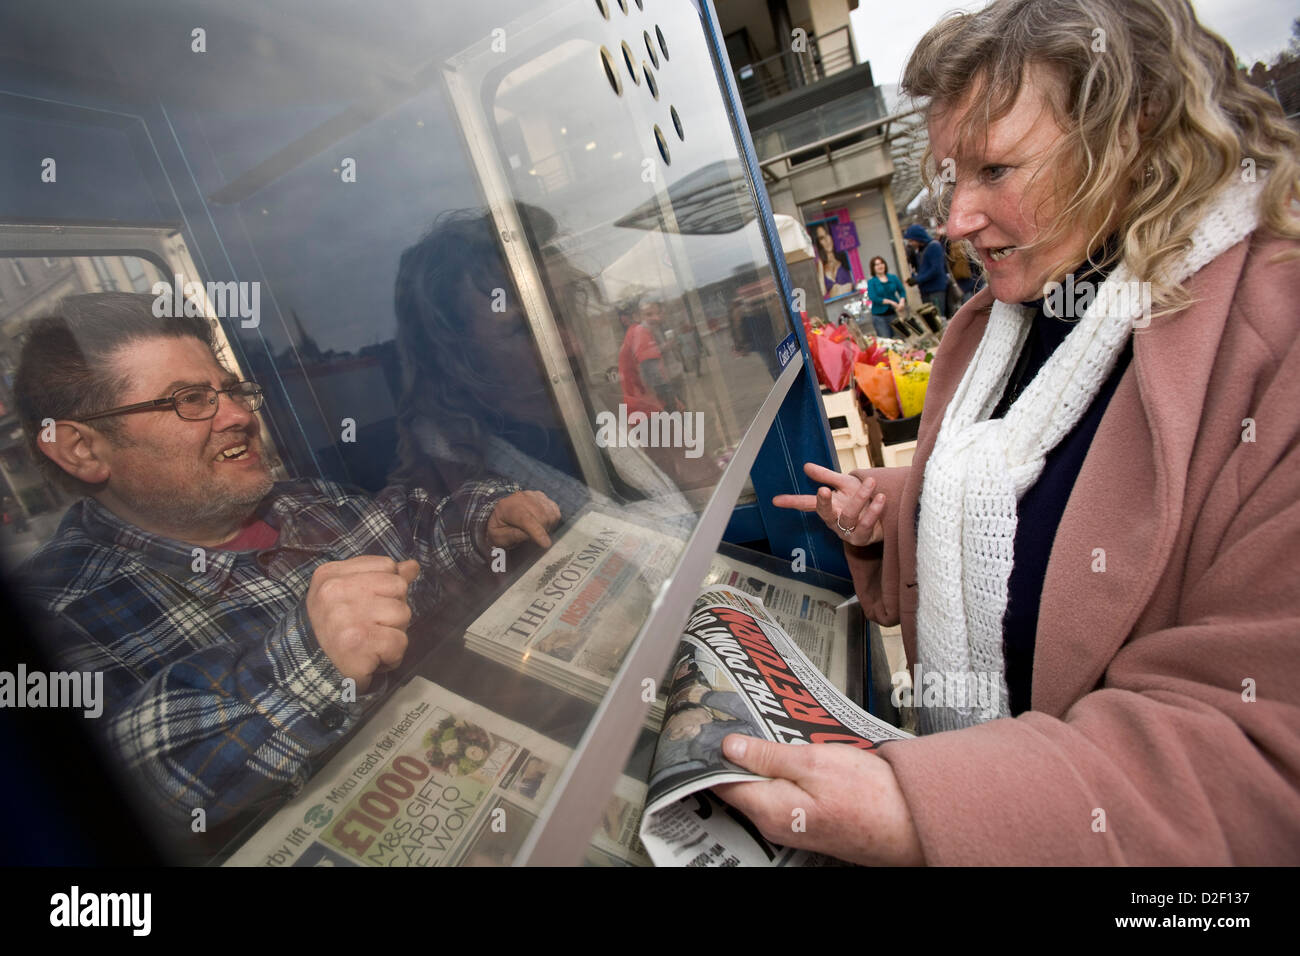 Vendor selling The Scotsman and Edinburgh Evening News newspapers from a booth on Princes Street, Edinburgh Stock Photo